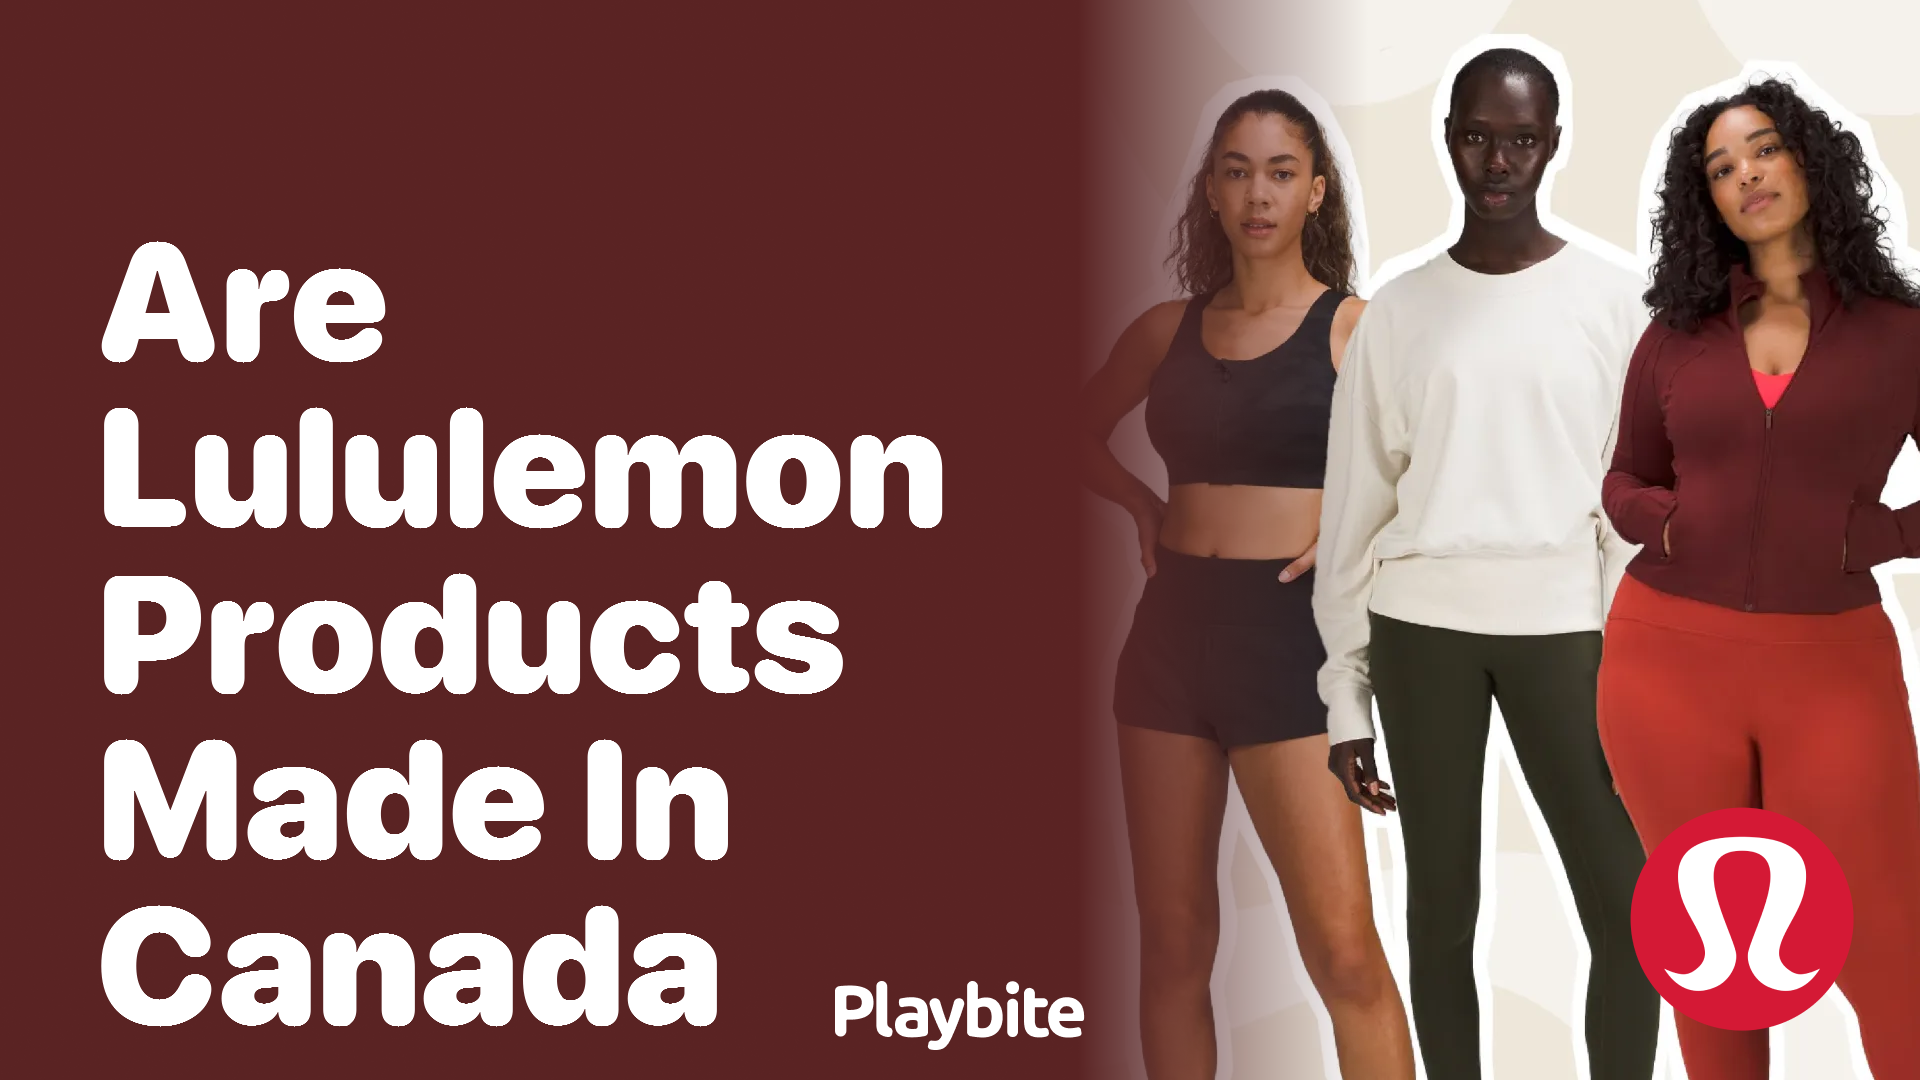 Are Lululemon Products Made in Canada? - Playbite